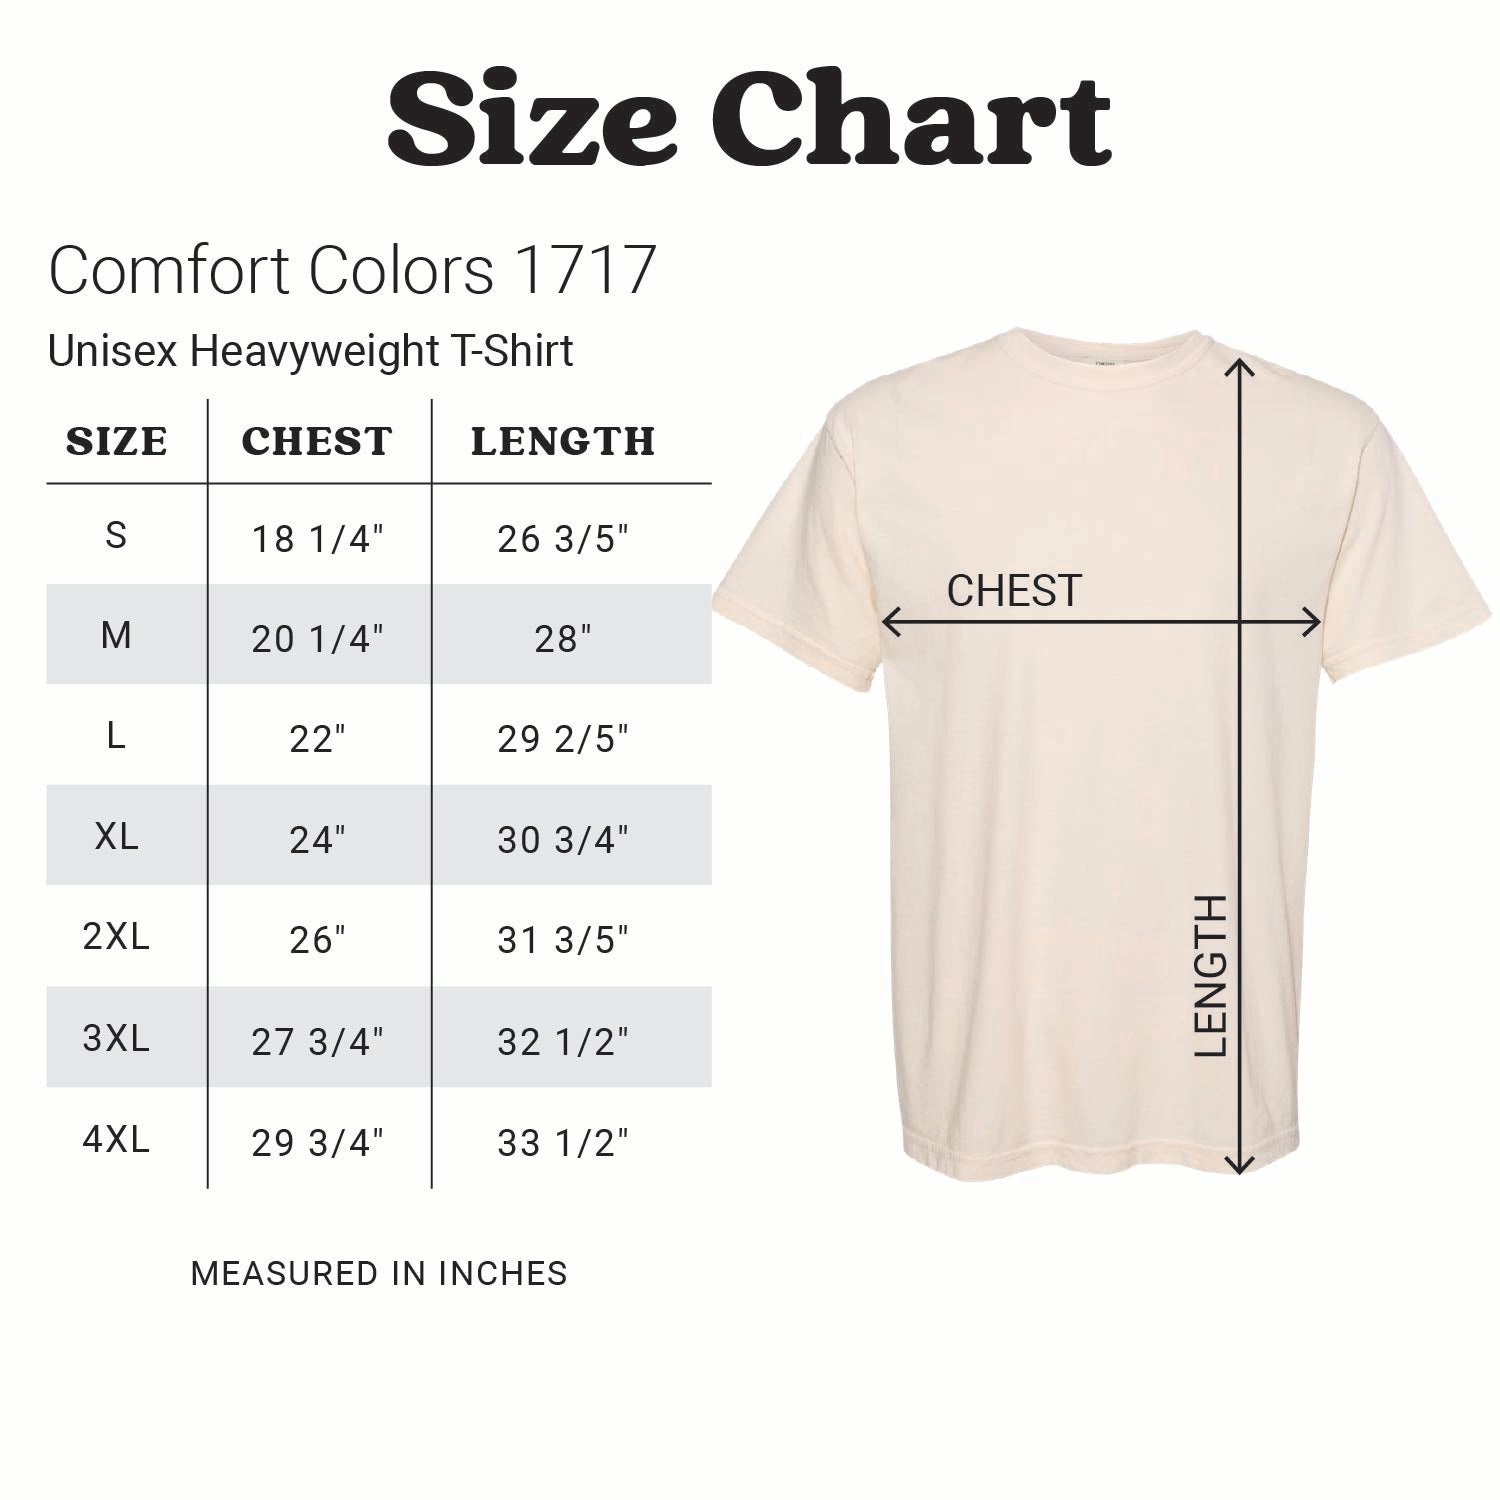 Size Chart for Comfort Colors 1717 | Semi Sweet Designs